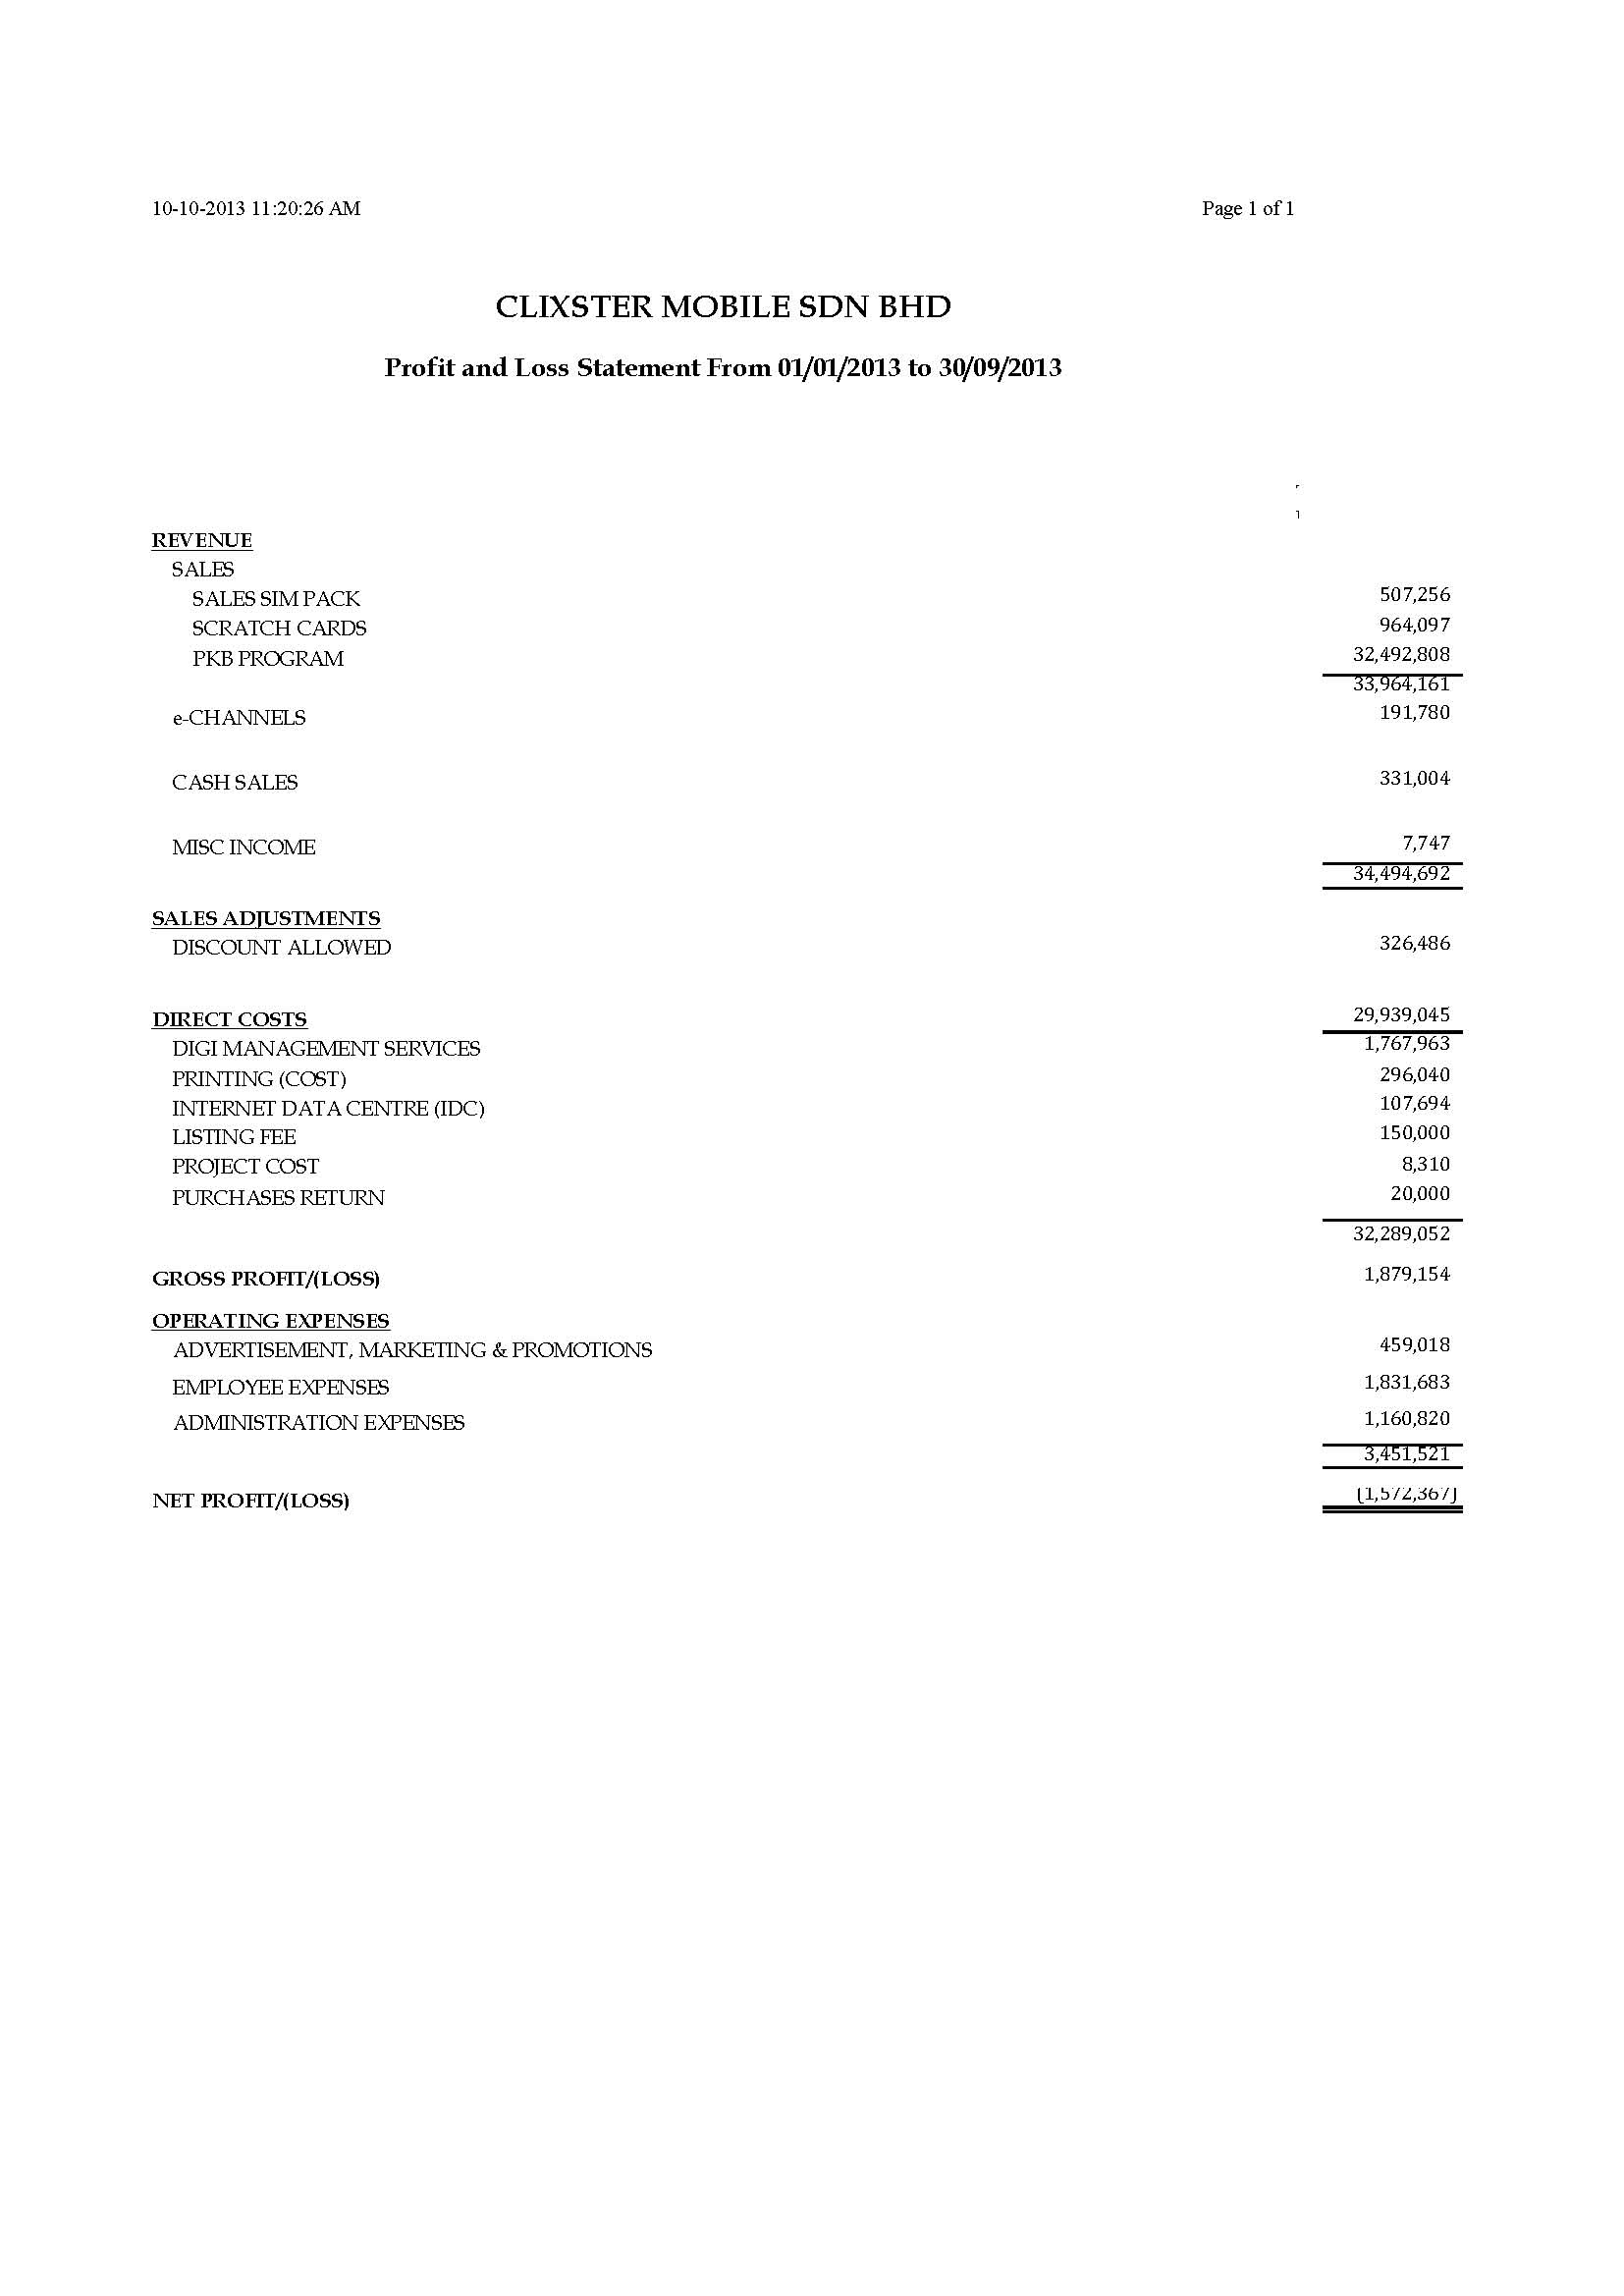 Profit and Loss Statement of CLIXSTER MOBILE SDN BHD